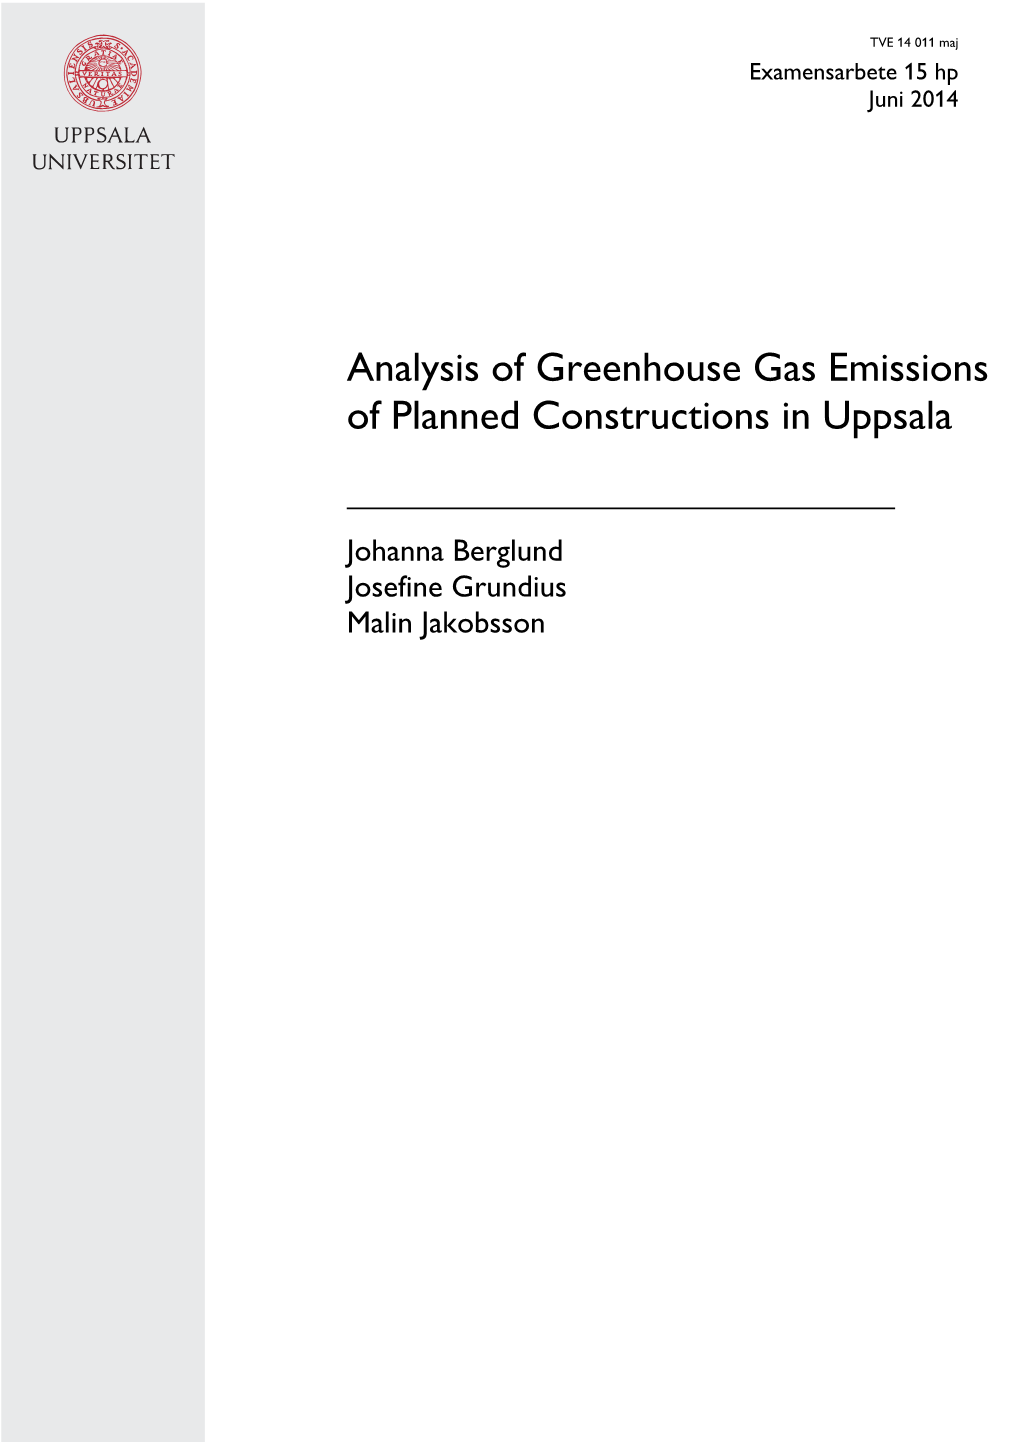 Analysis of Greenhouse Gas Emissions of Planned Constructions in Uppsala